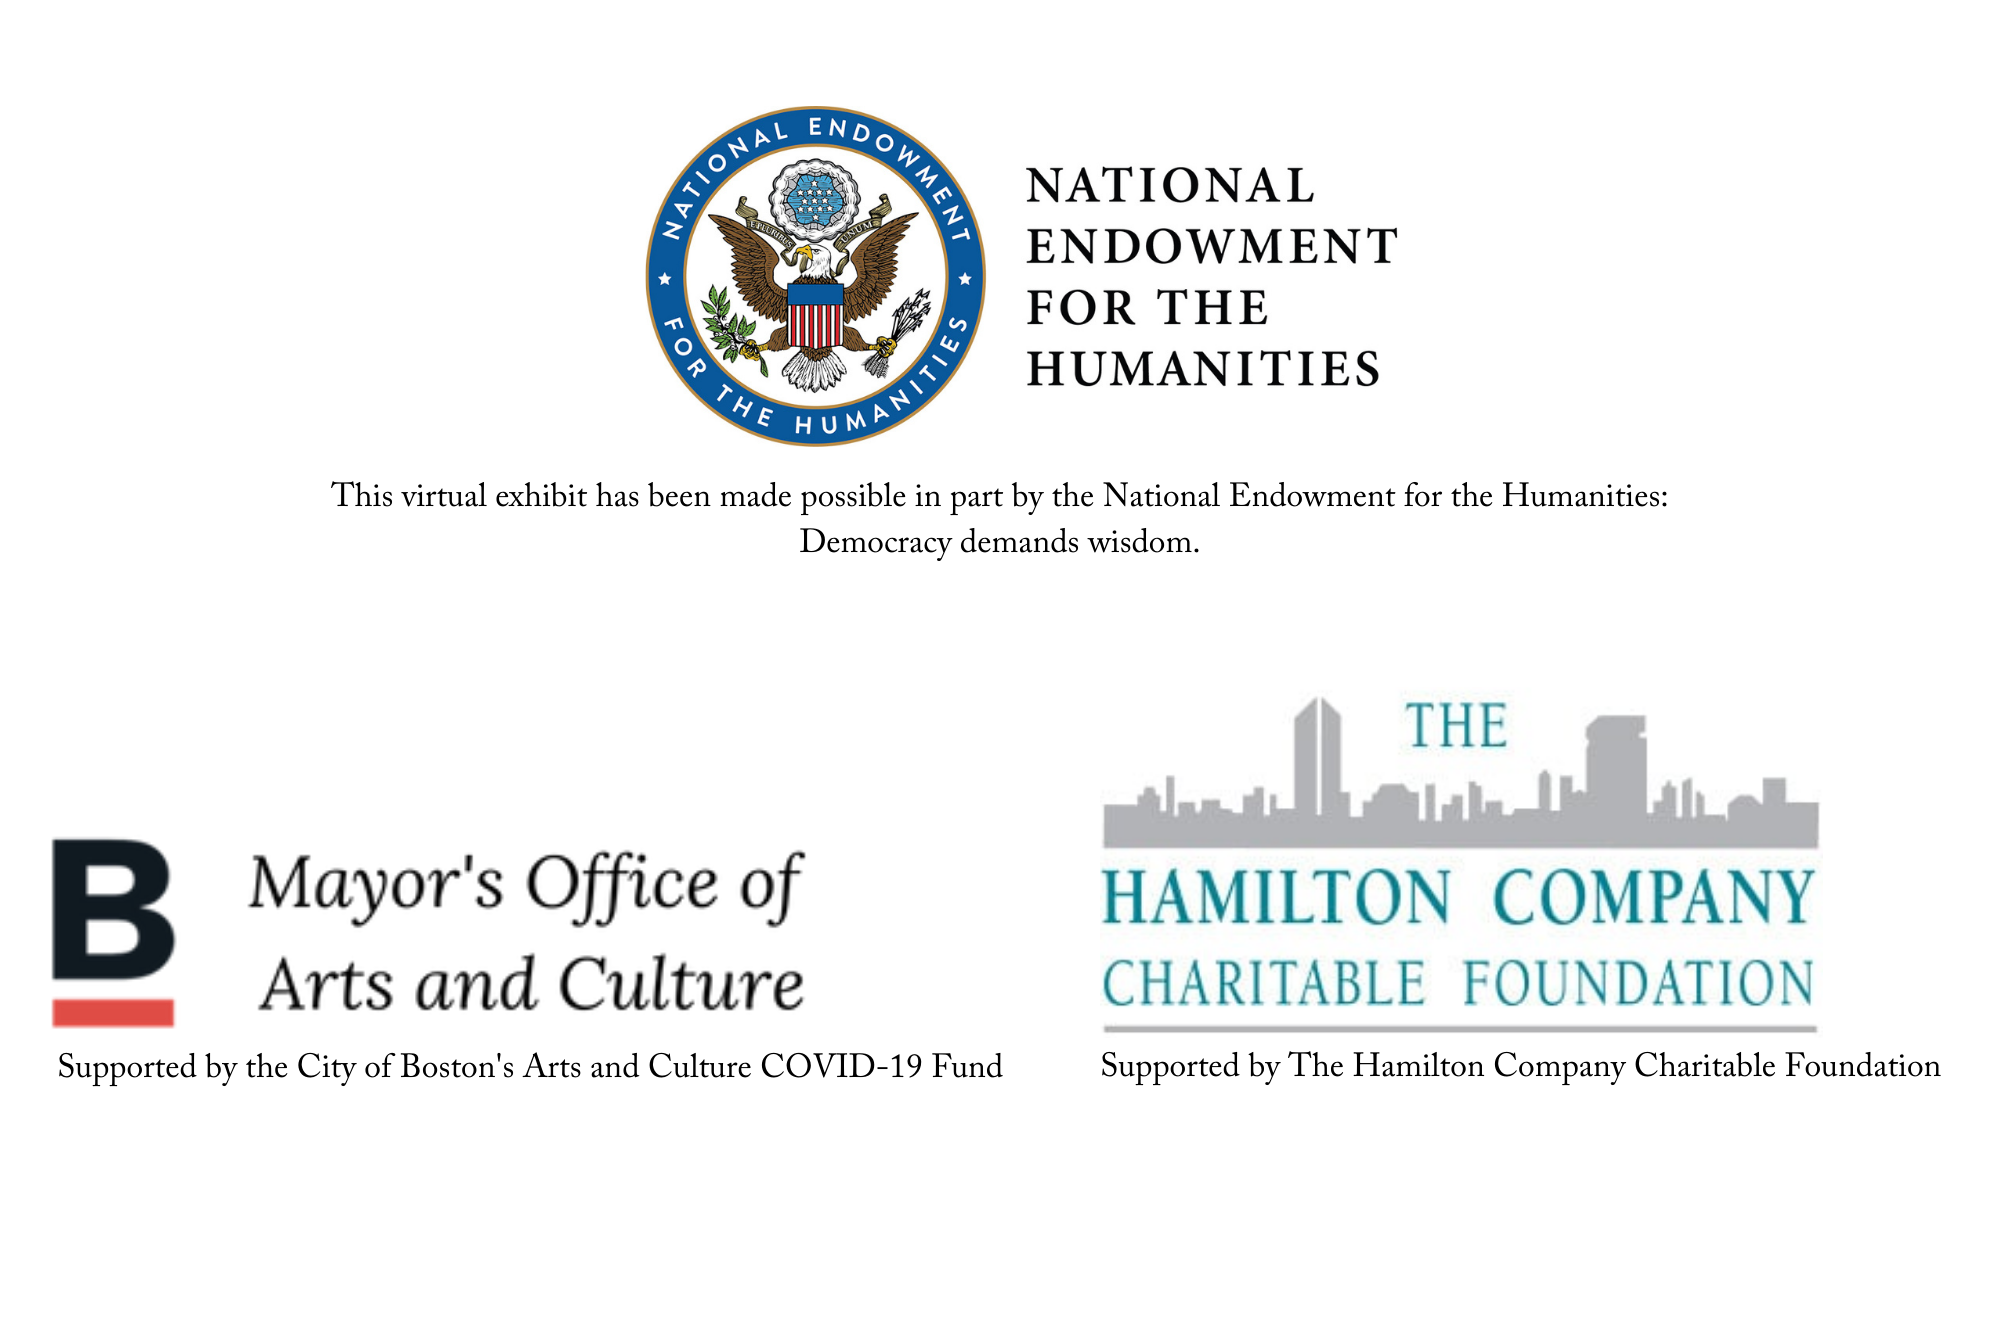 Supported by the National Endowment for the Humanities, Boston Mayor's Office of Arts and Culture, and The Hamilton Company Charitable Foundation.